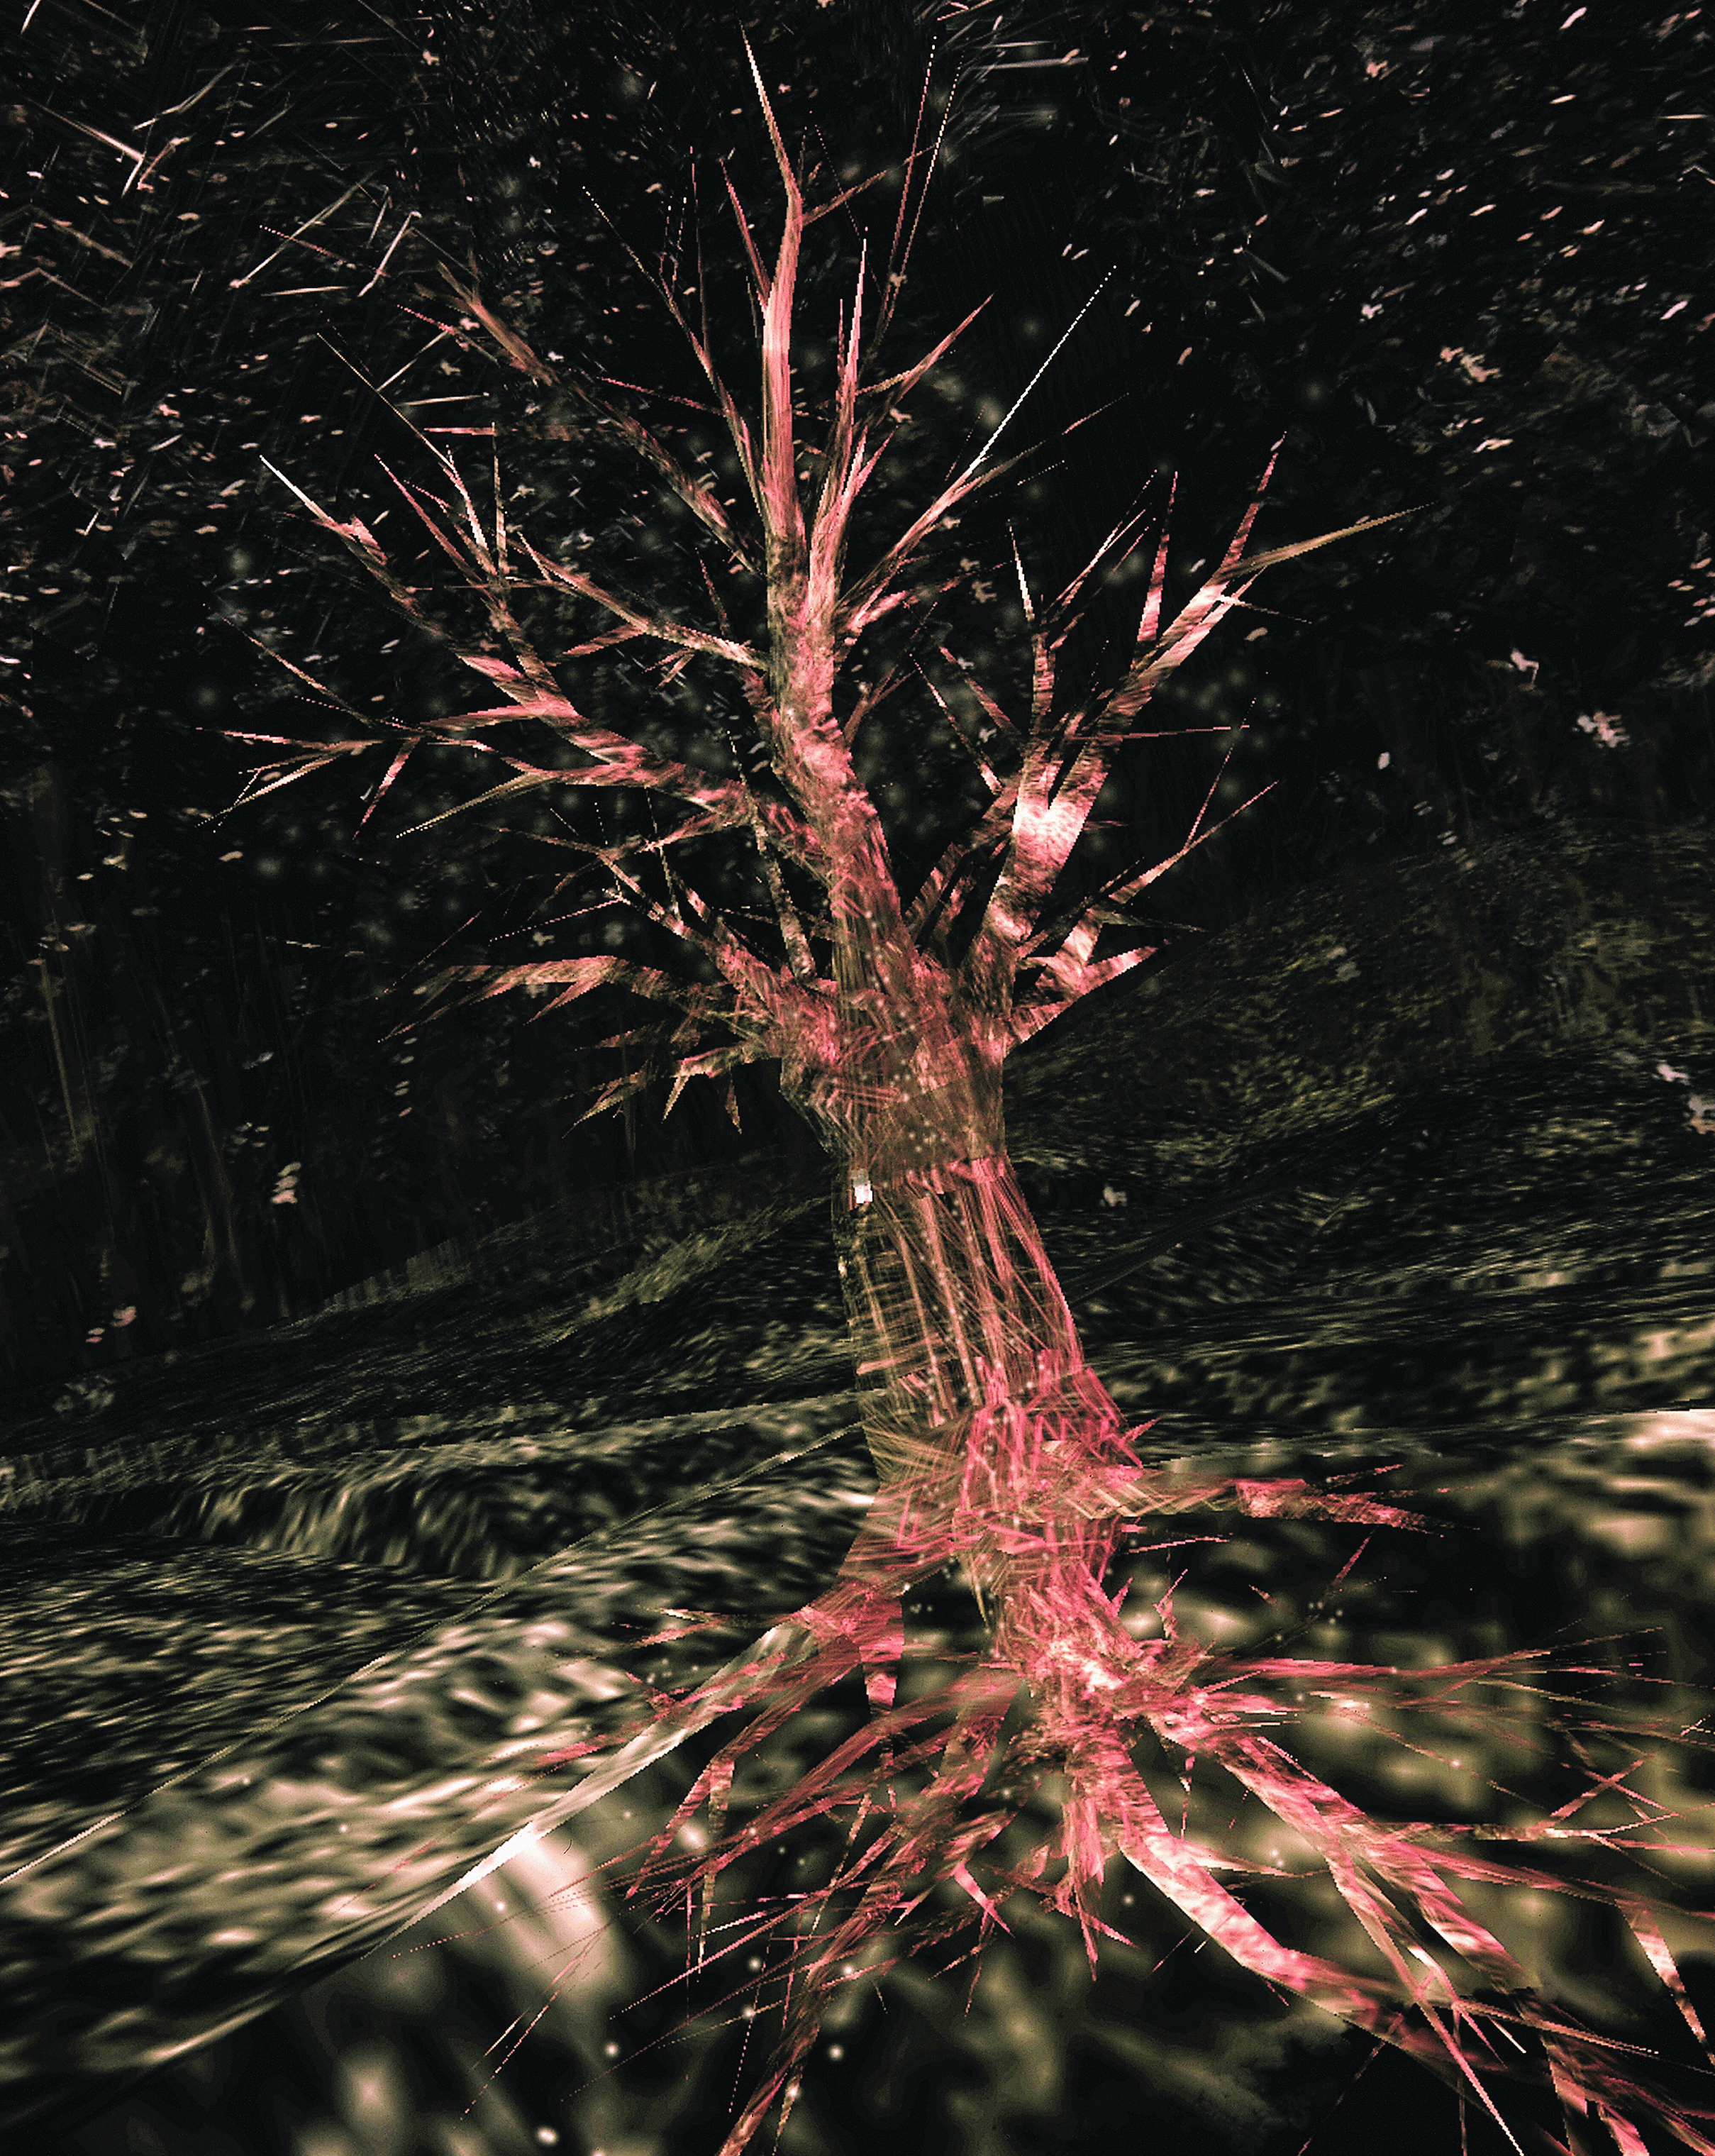 Char Davies. Vertical Tree, Osmose (1995). Digital still
                                 image captured during immersive performance of the virtual
                                 environment Osmose.